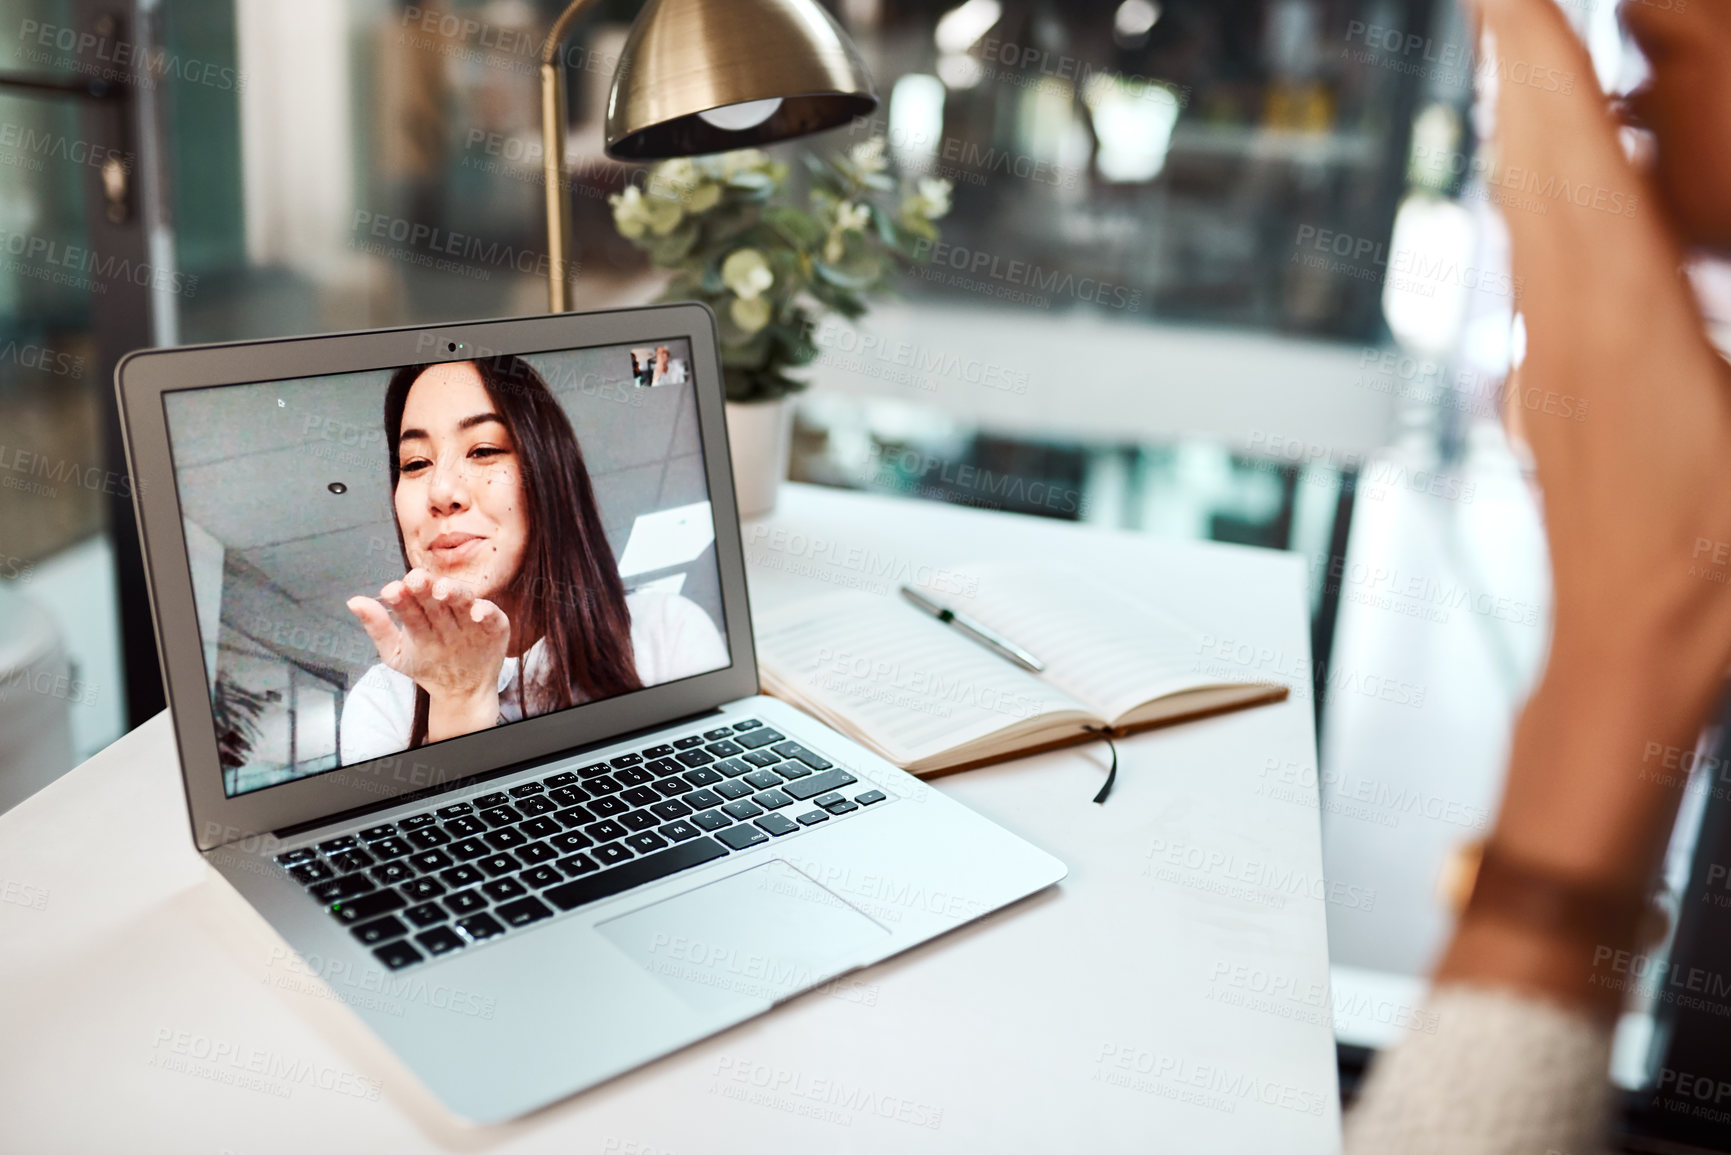 Buy stock photo Shot of a young woman blowing a kiss while appearing on a laptop screen during a video call